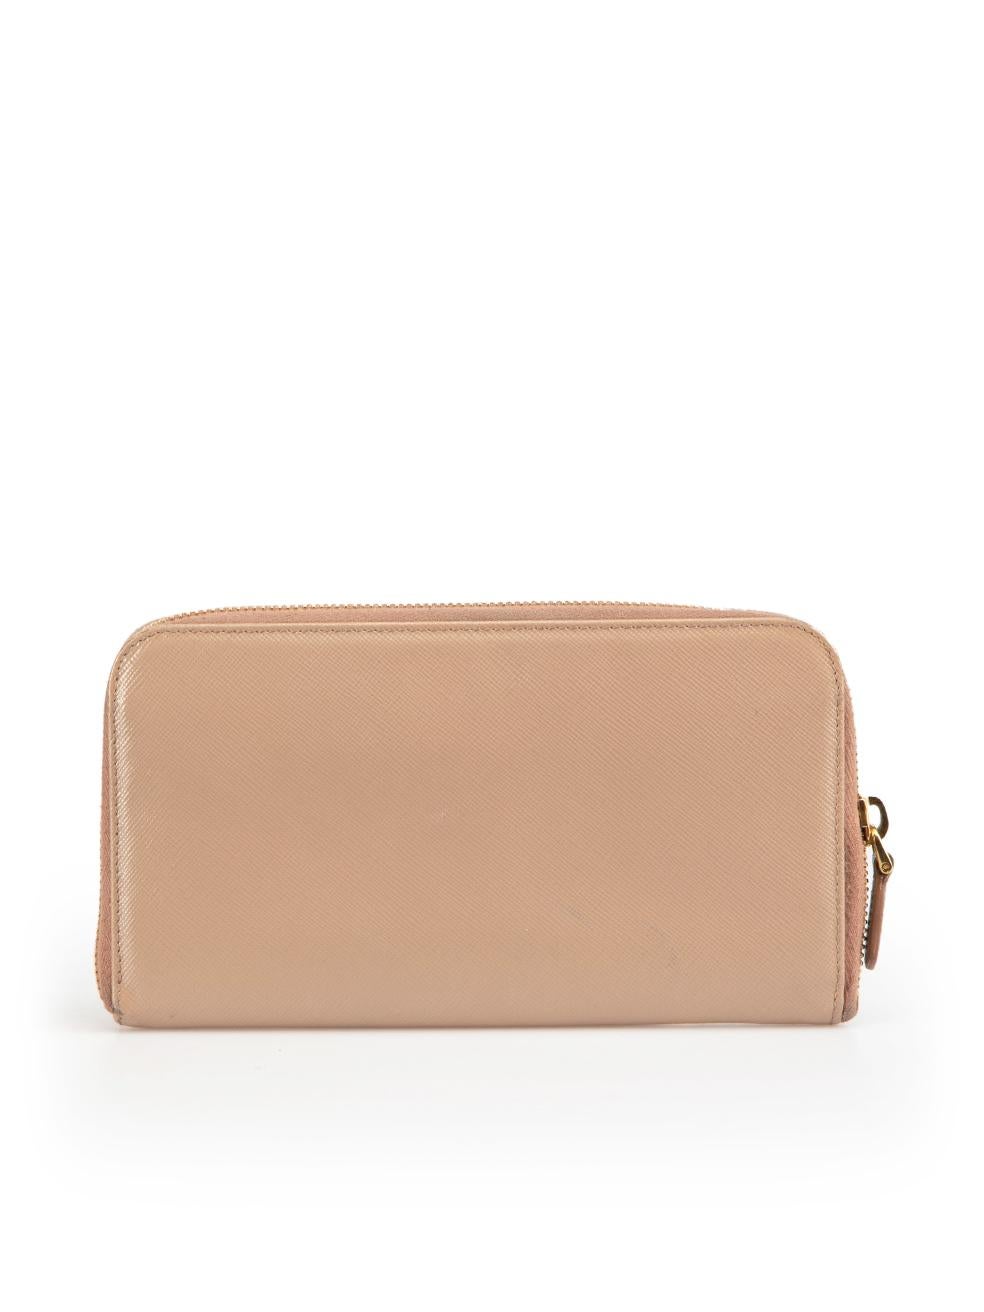 Prada Beige Saffiano Leather Zipped Wallet In Good Condition For Sale In London, GB